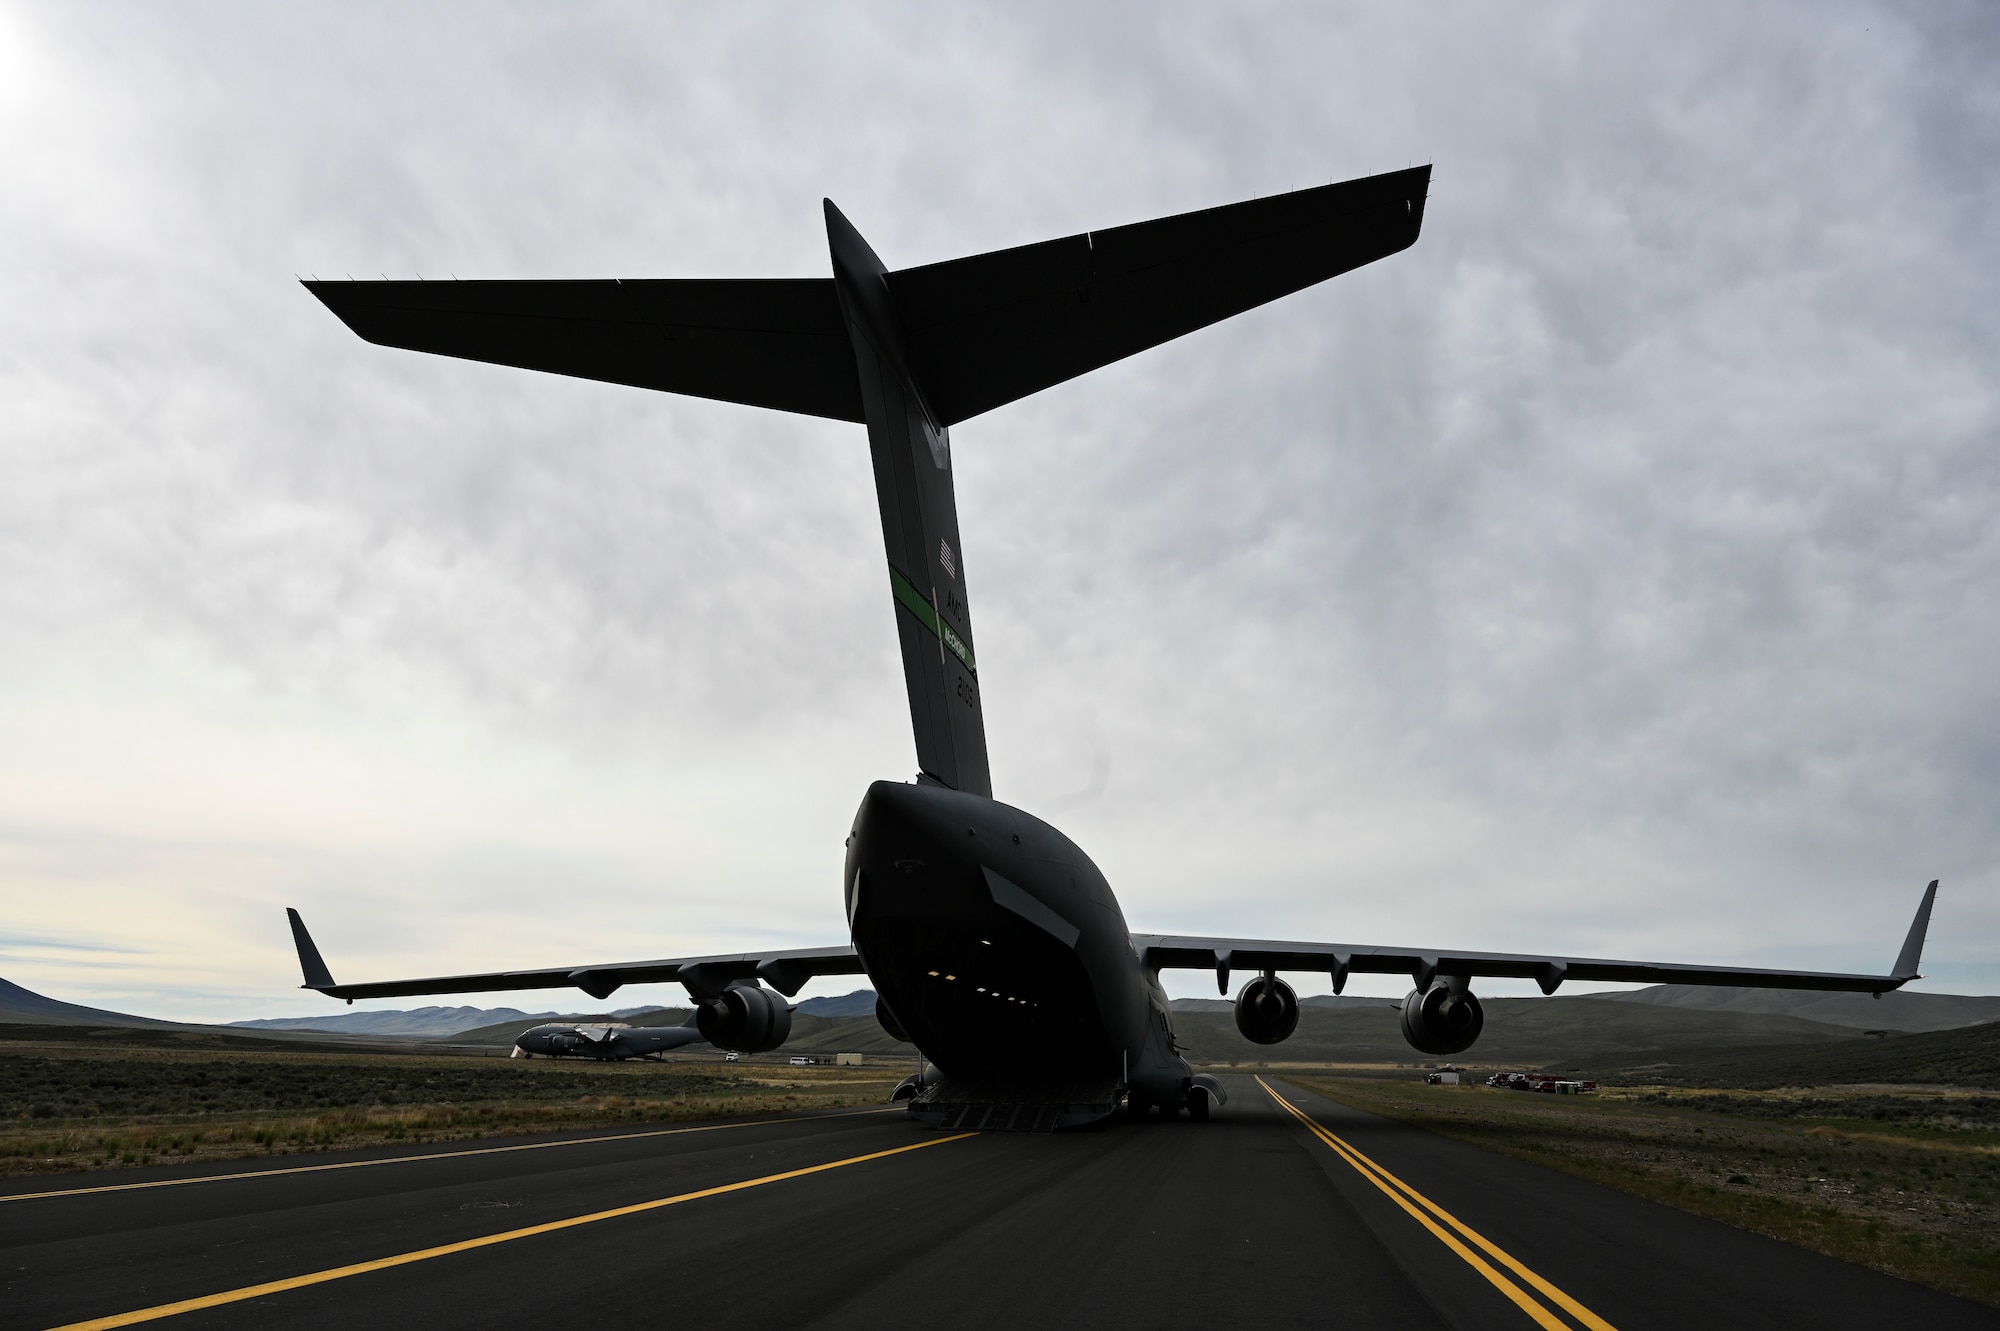 A C-17 Globemaster III sits at Yakima, Washington, April 28, 2021, after dropping off U.S. Army 7th Infantry Division Soldiers as part of Exercise Rainier War. The exercise tests the 62nd Airlift Wing's capability to plan, generate and execute a deployment tasking, sustain contingency operations, demonstrate full spectrum readiness while executing agile combat employment in a contested, degraded and operationally limited environment. (U.S. Air Force photo by Master Sgt. Julius Delos Reyes)